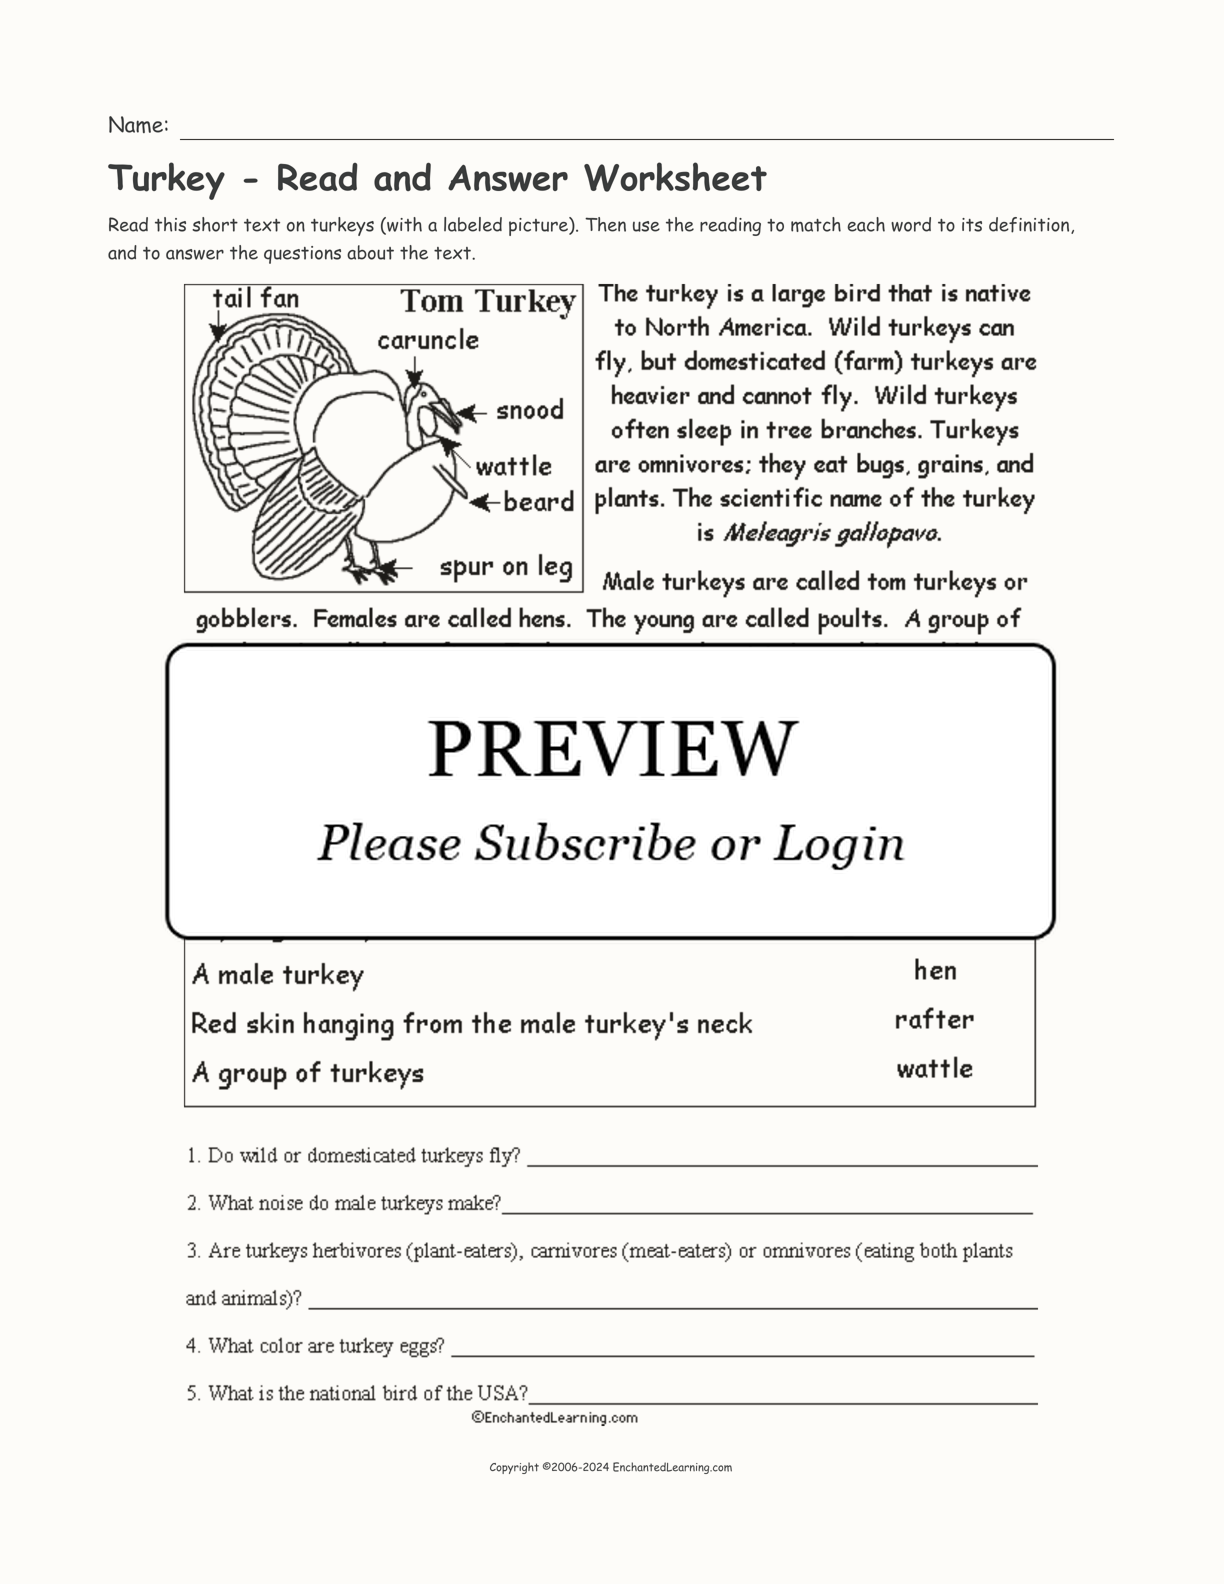 Turkey - Read and Answer Worksheet interactive worksheet page 1